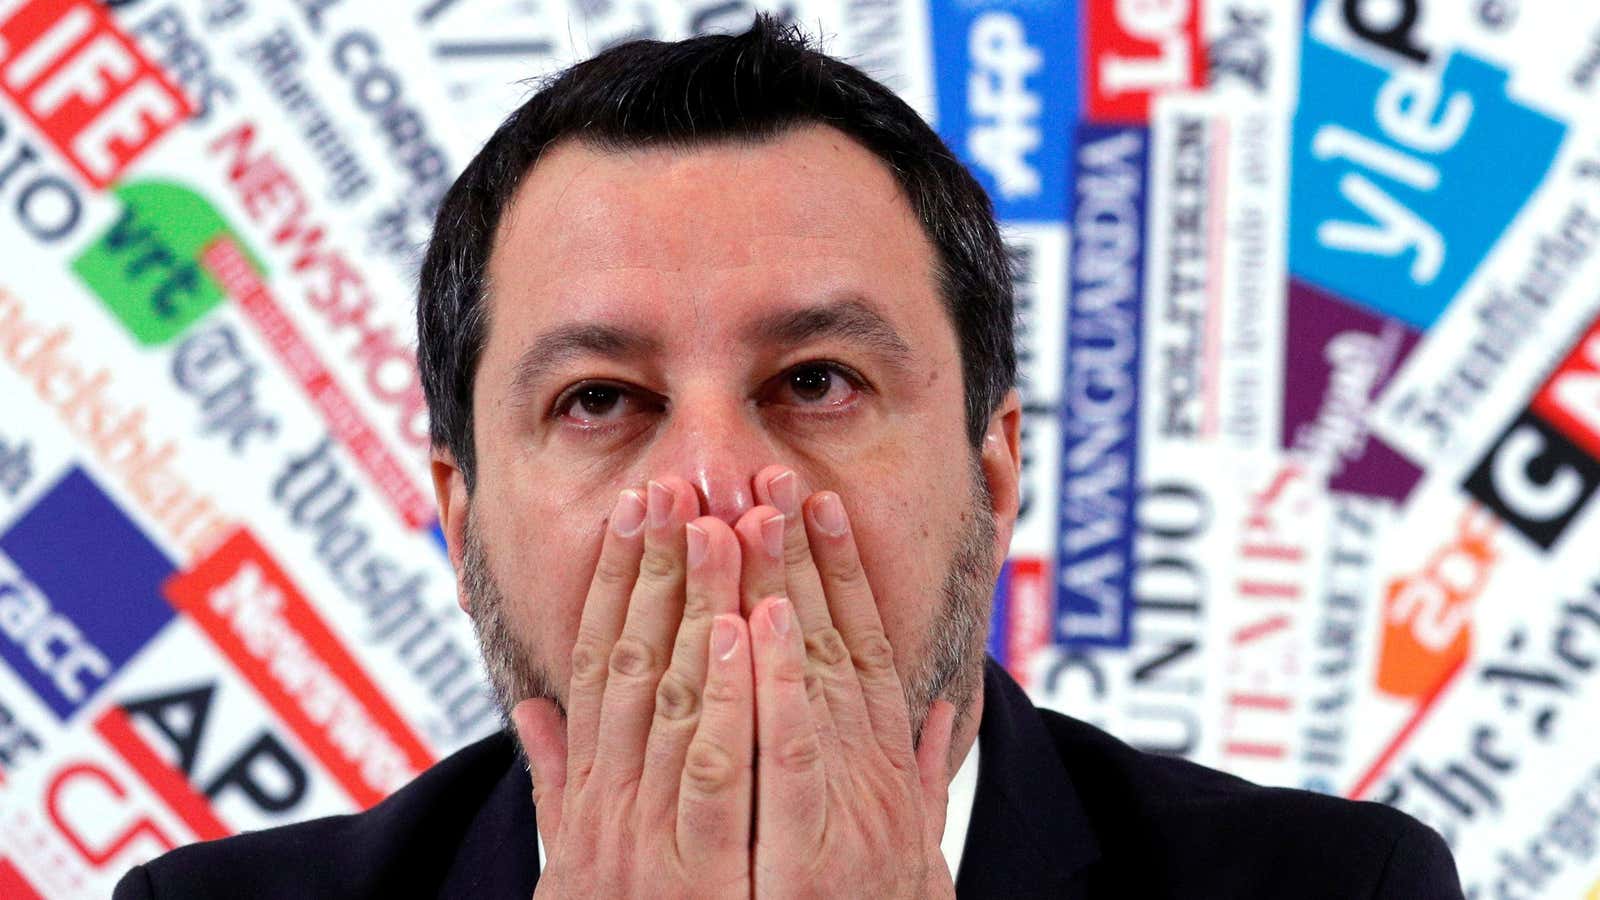 Italy’s far-right party leader Matteo Salvini touches his face.